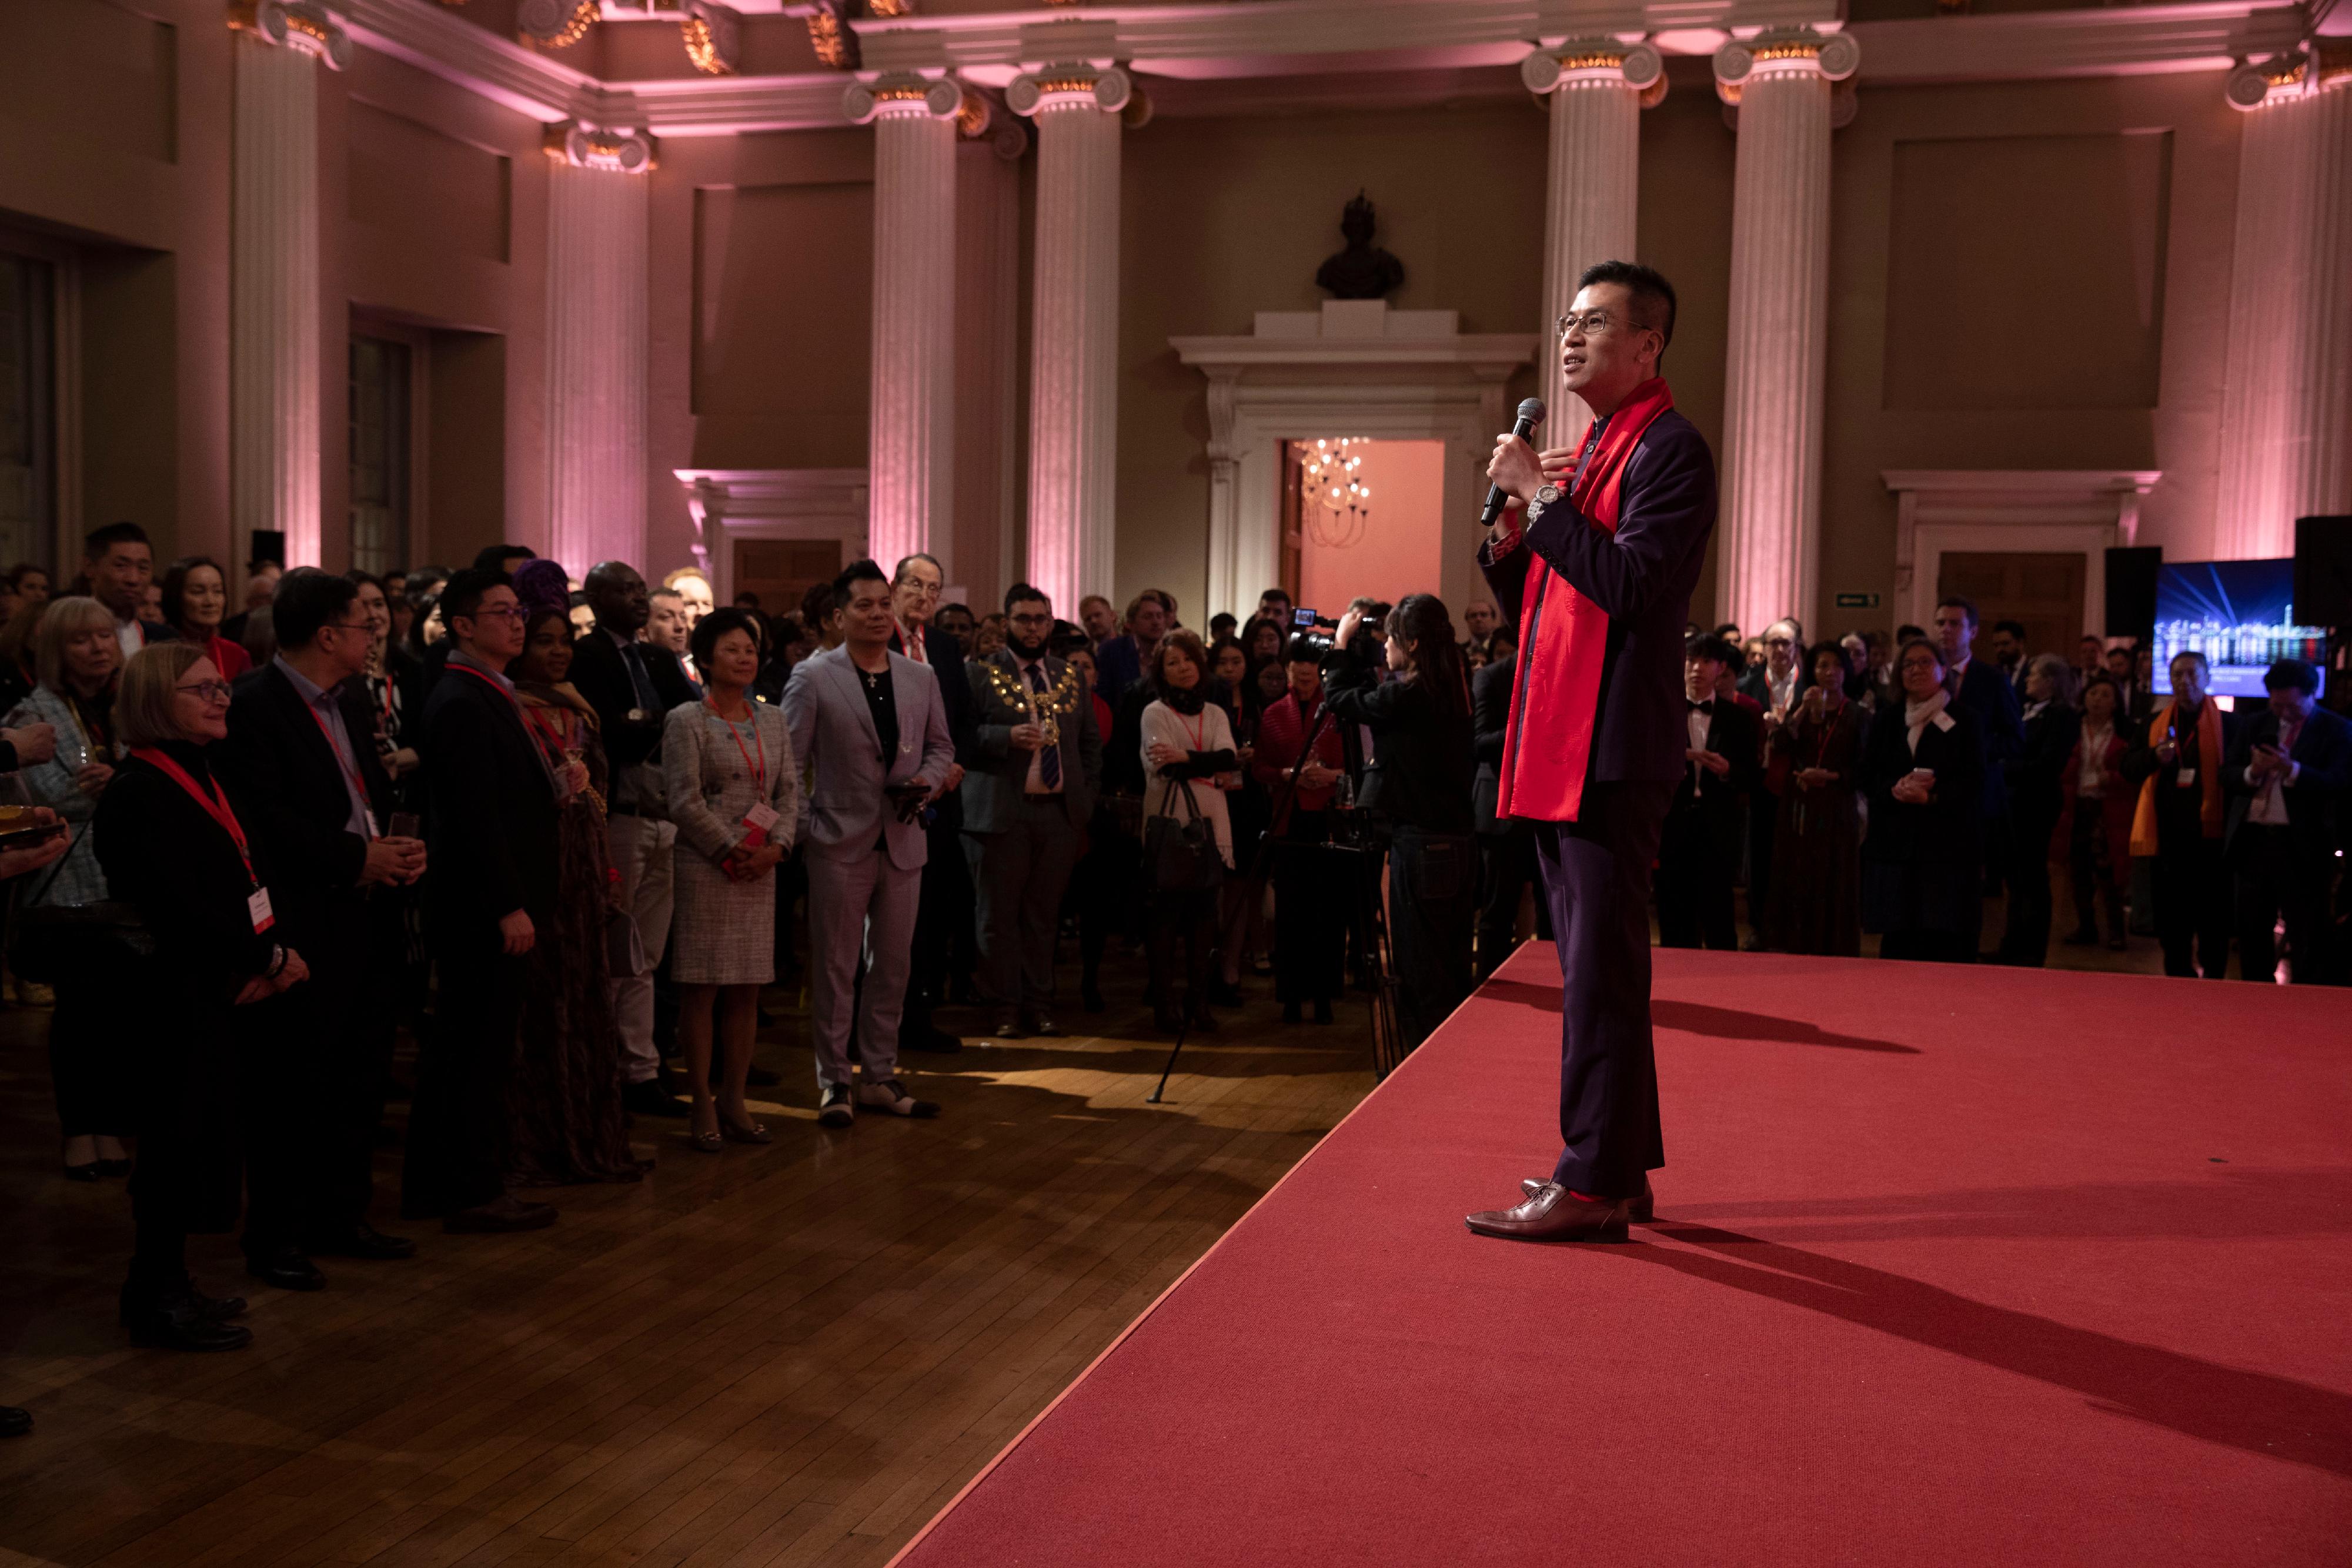 The Hong Kong Economic and Trade Office, London (London ETO) greeted the Year of the Rabbit in the United Kingdom by hosting a celebratory reception at Banqueting House, Whitehall, in London on January 26 (London time). Photo shows the Director-General of the London ETO, Mr Gilford Law, delivering a speech at the reception.